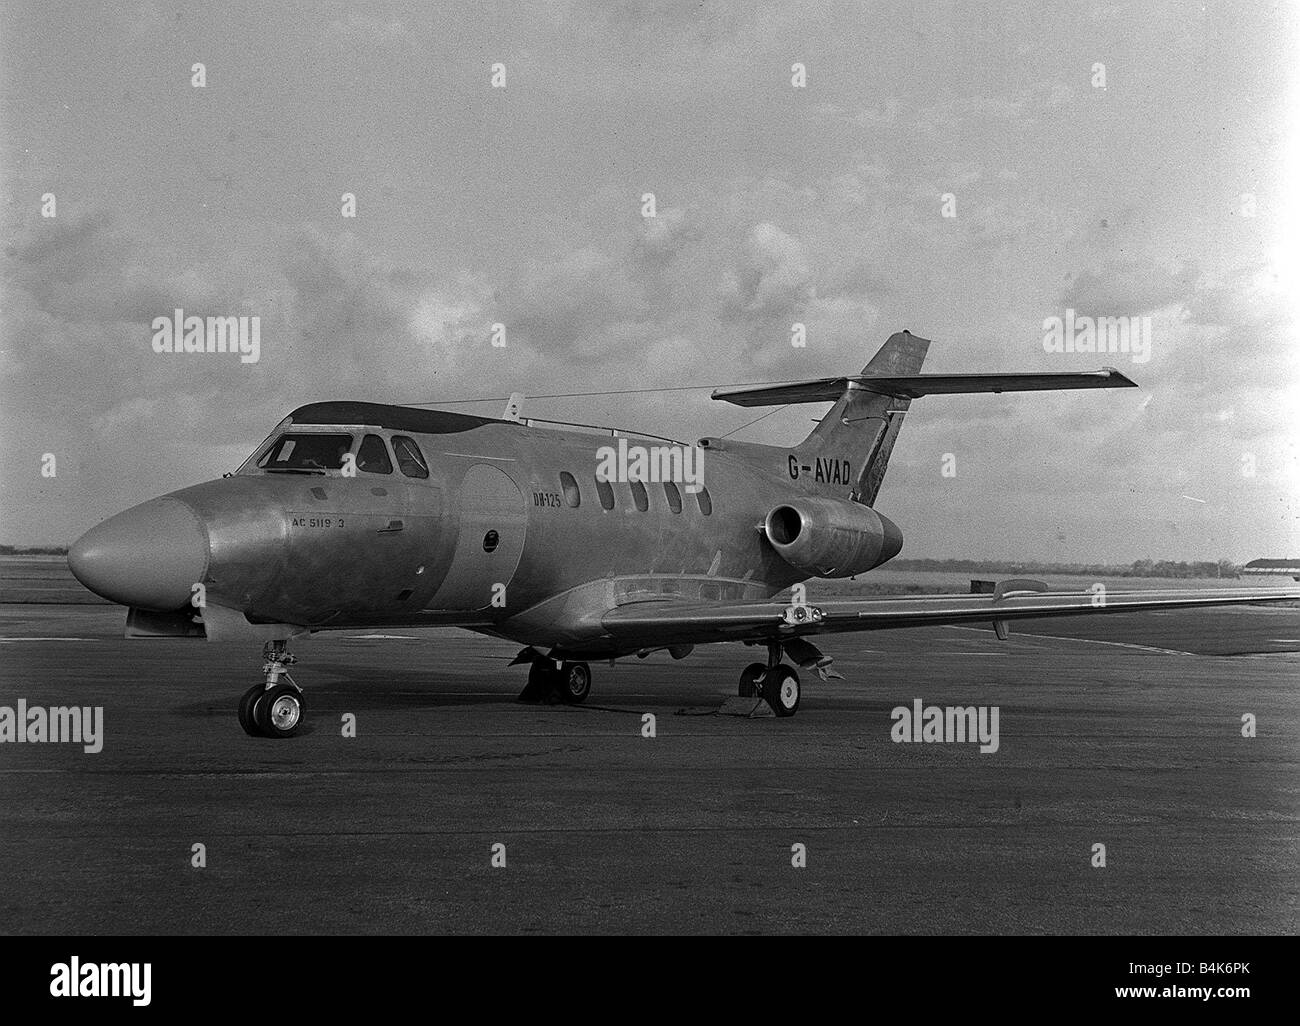 Aircraft Hawker Siddeley HS125 3A business Jet November 1966 handed over at Hawker Siddeley s Chester factory to an American company LFEY003 Flight100 Stock Photo